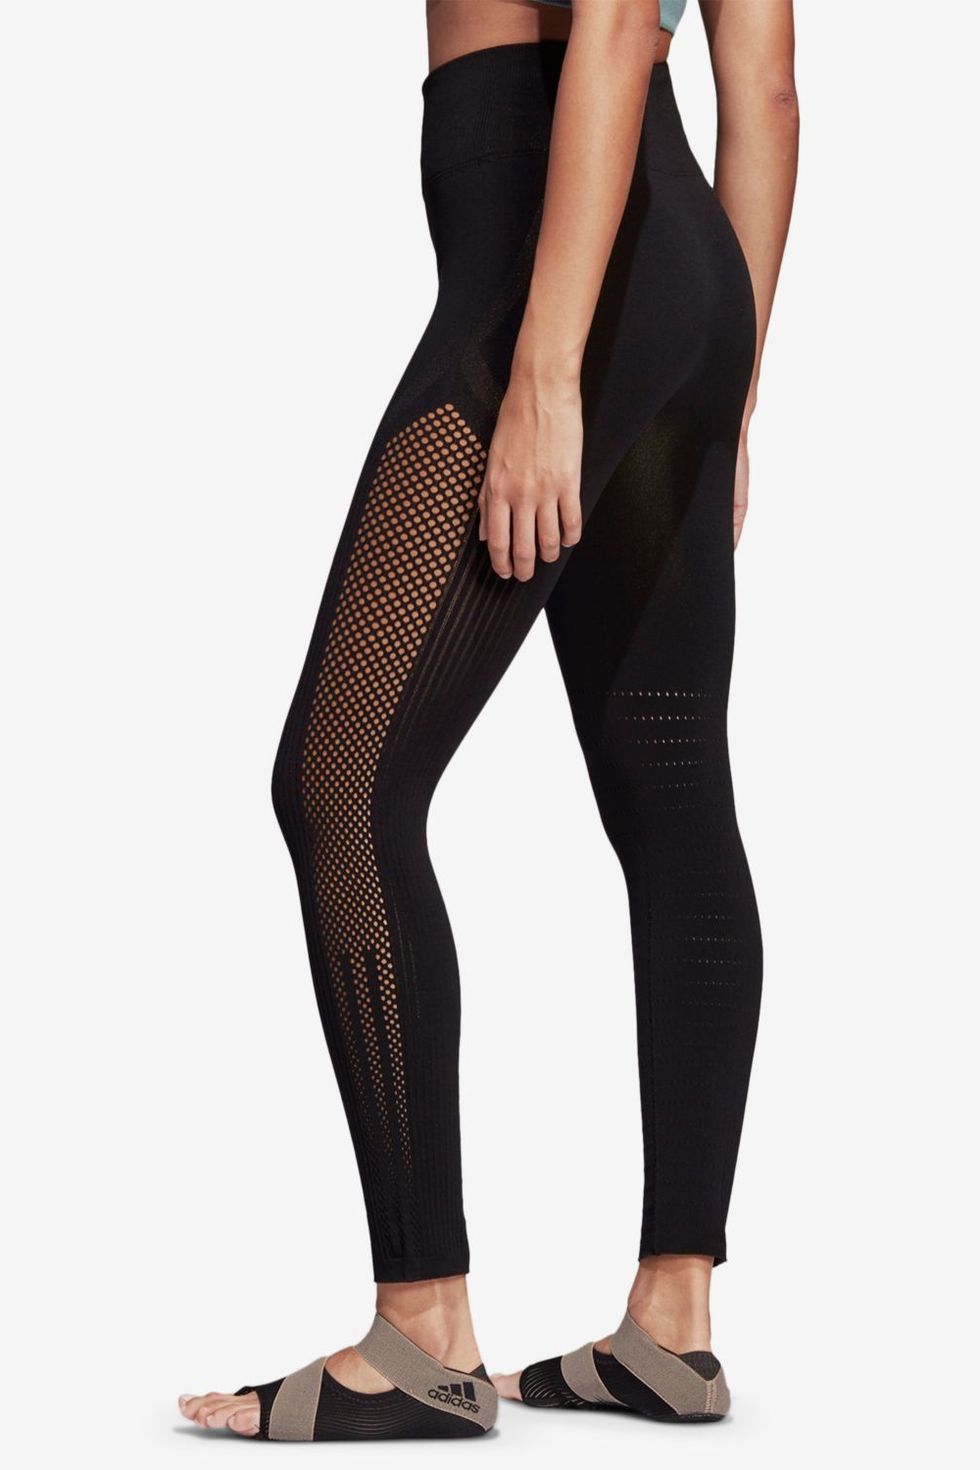 MITAAMI Womens New Leggings with Mesh Panel and Stripes Airy